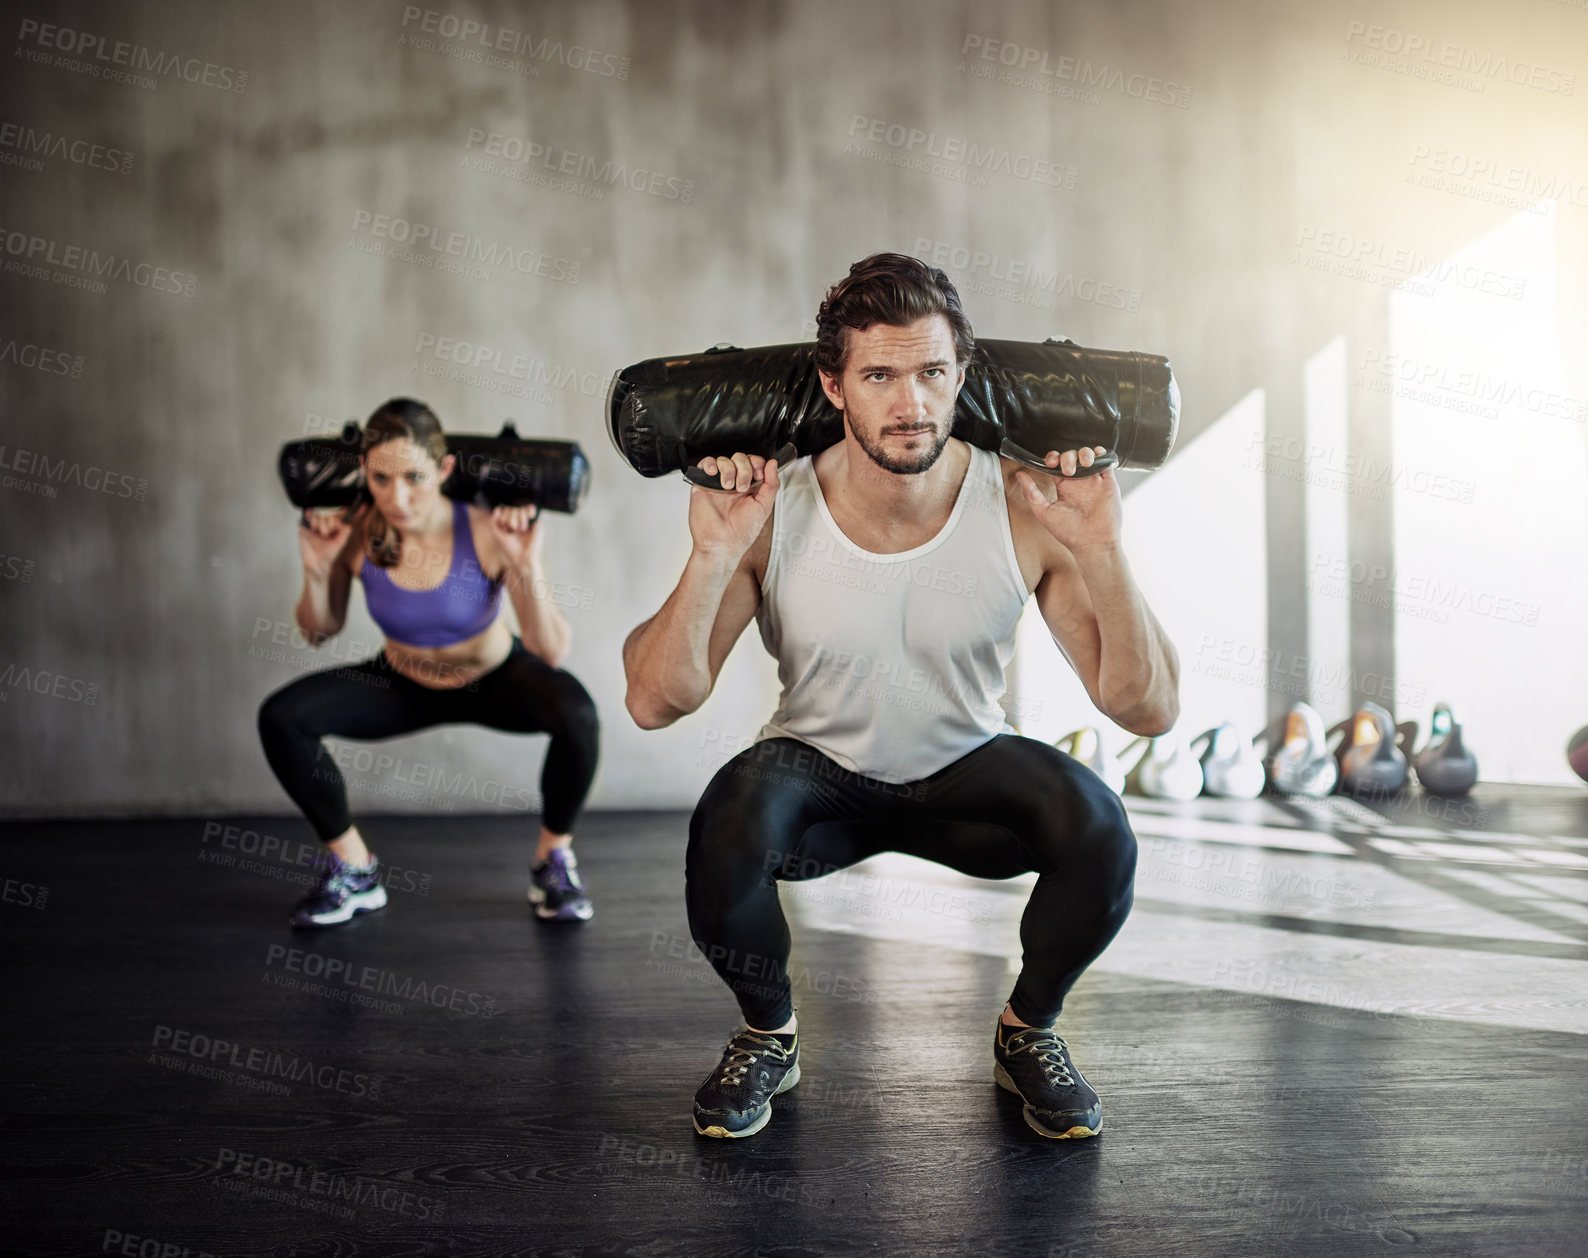 Buy stock photo Shot of two young people working out in the gym using weighted bags